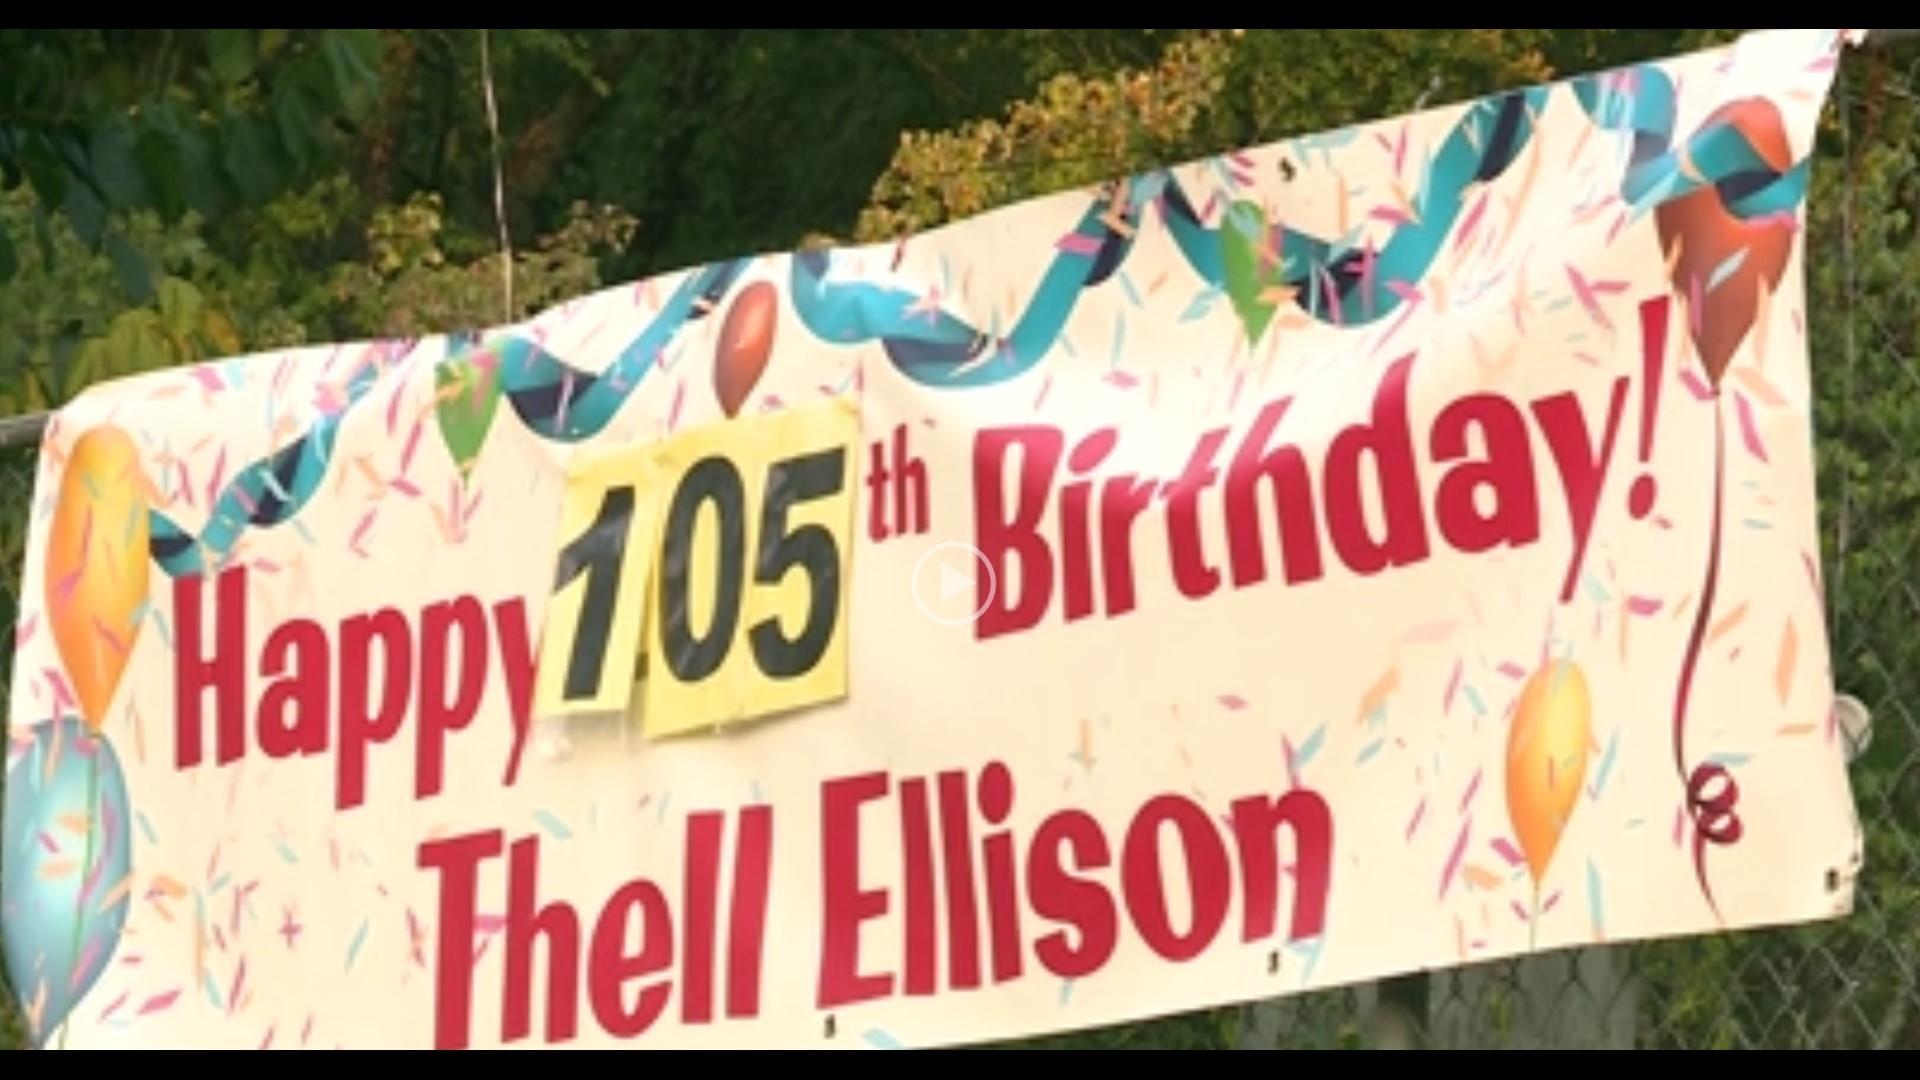 Thell Ellison celebrated his 105th birthday on Sept. 14, 2022.